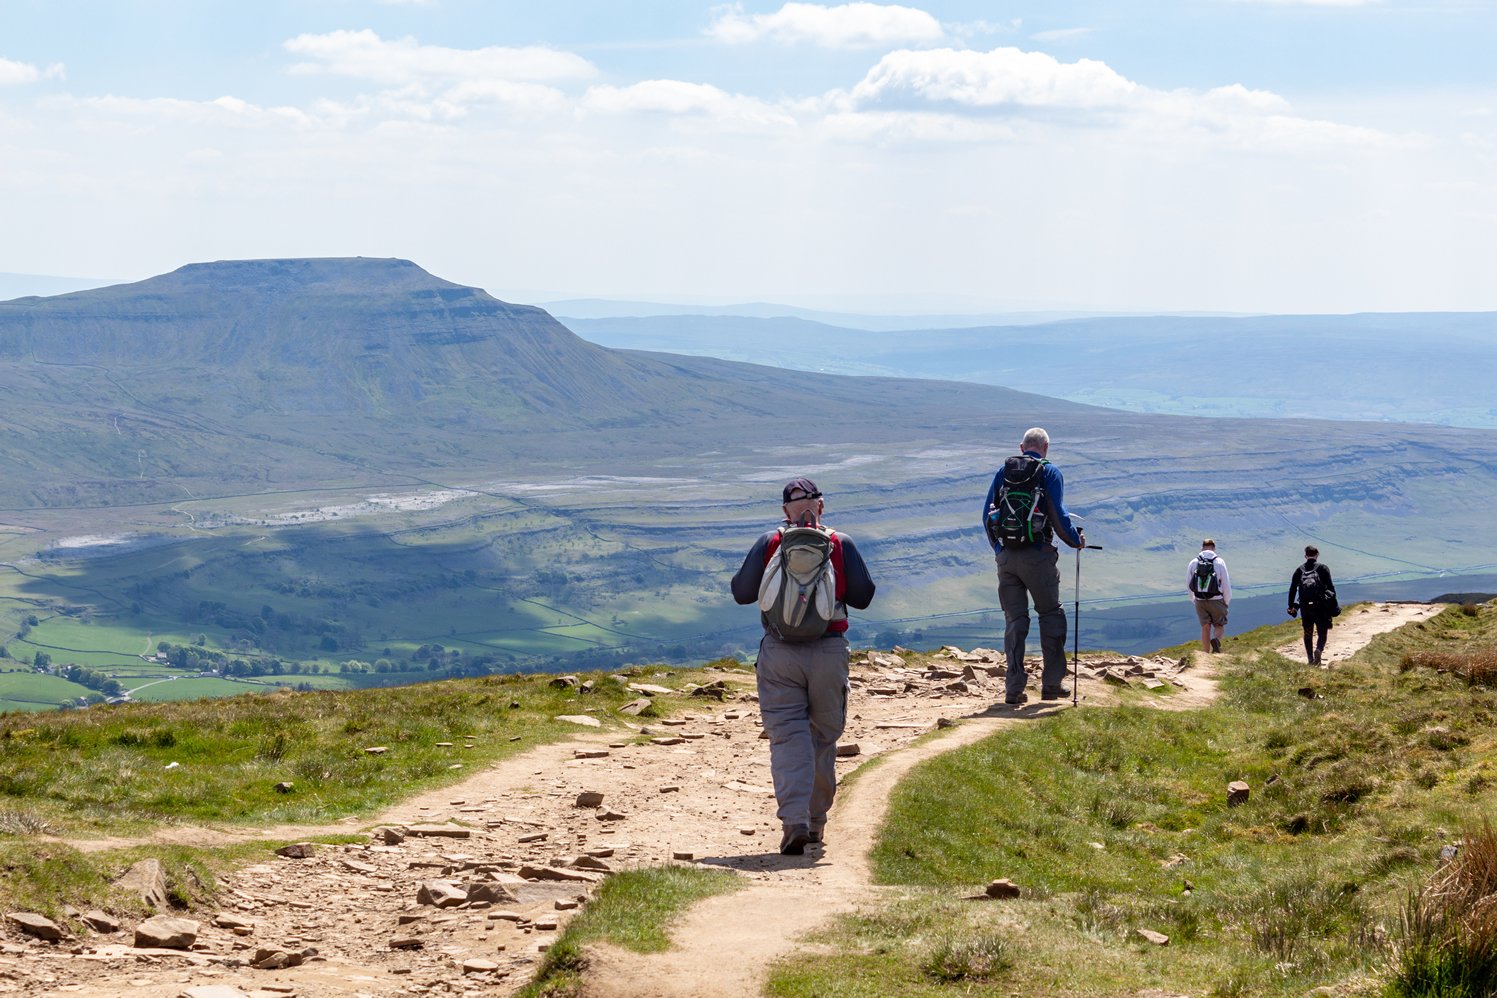 Image name walkers descending whernside view of ingleborough sunny yorkshire the 5 image from the post Stride Out in Yorkshire: Celebrate National Walking Day in Yorkshire.com.